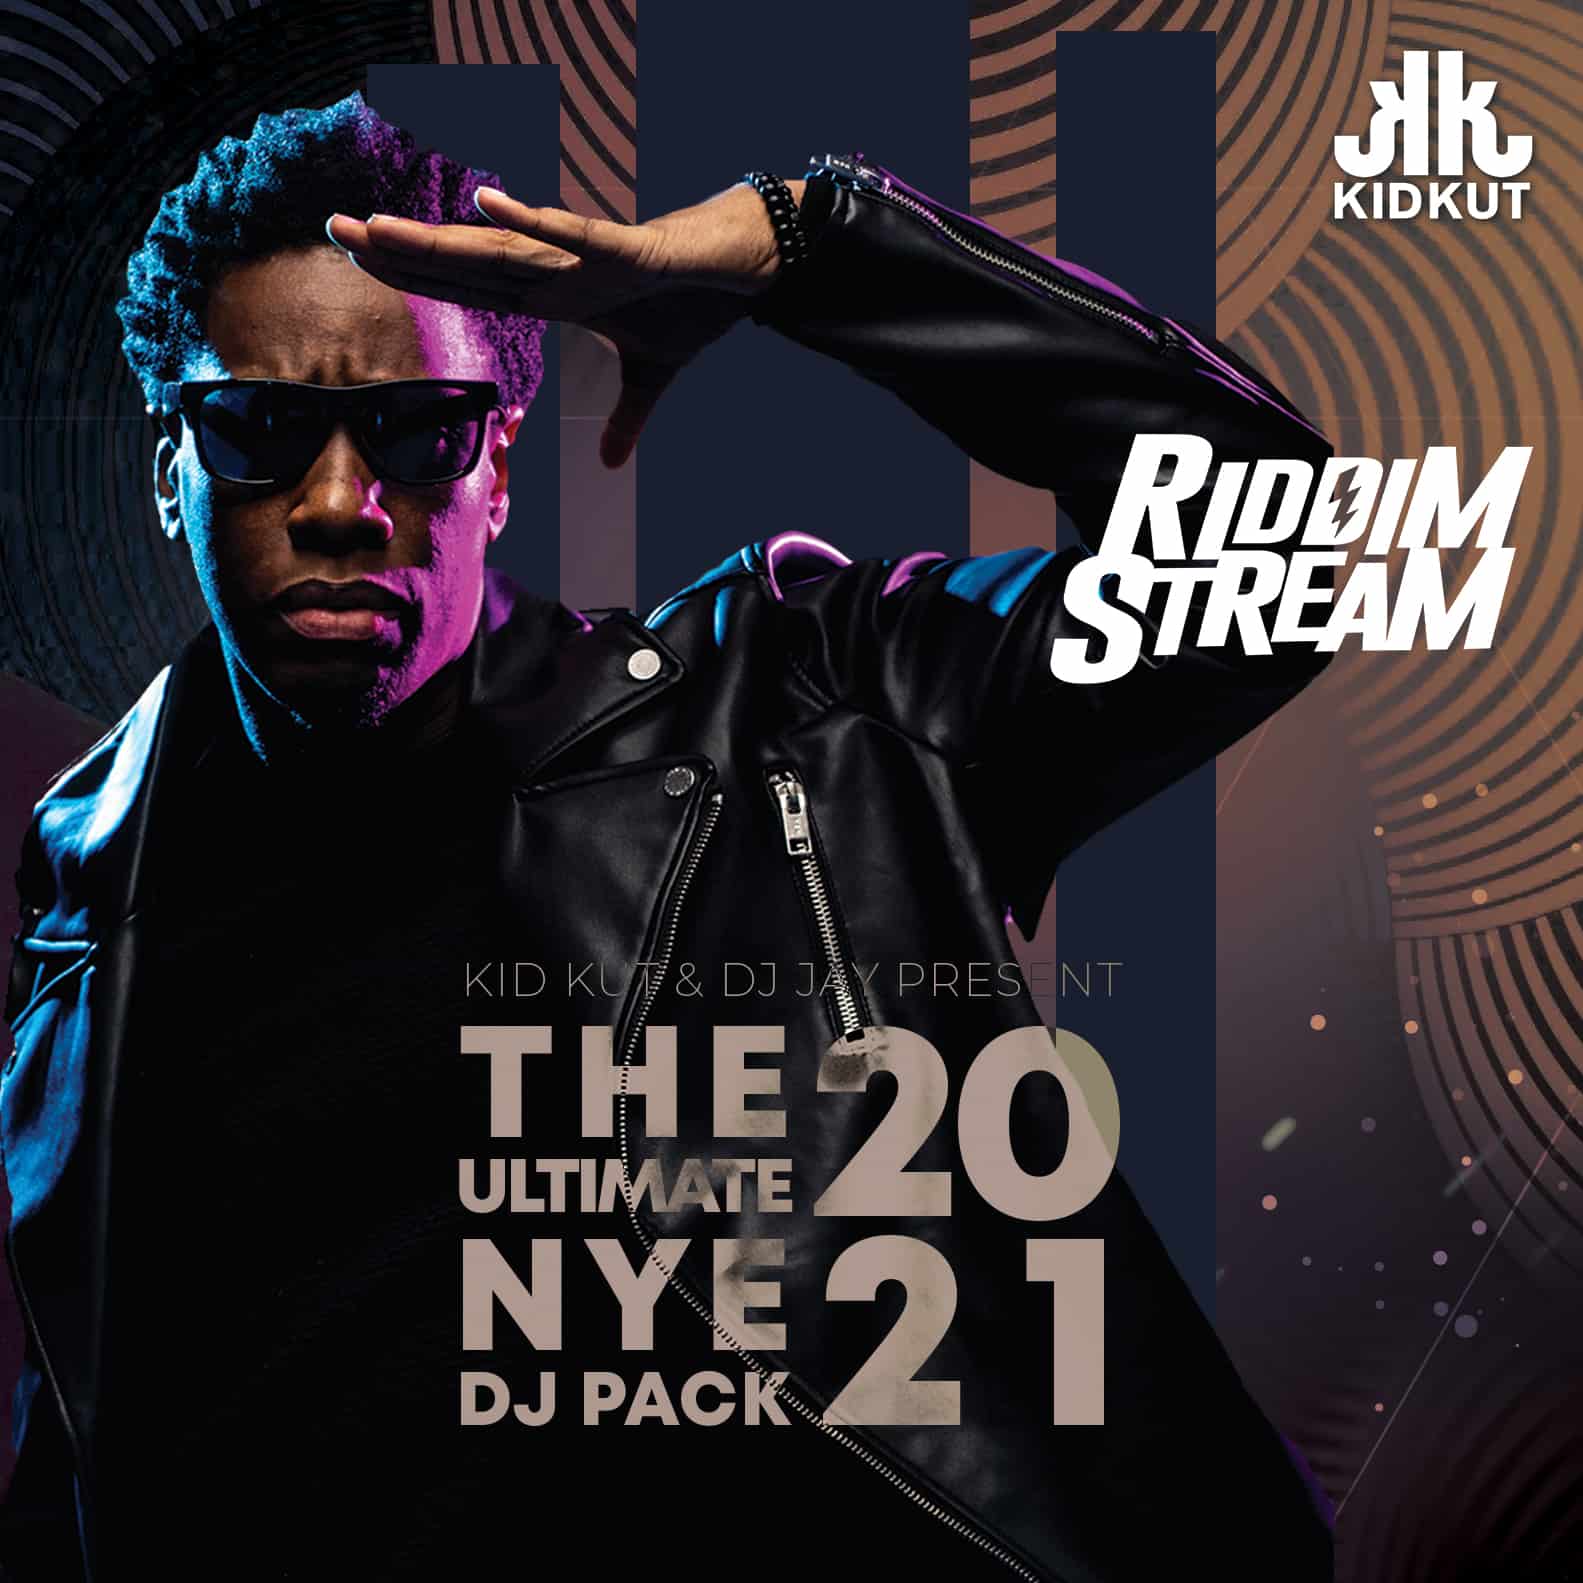 Kid Kut &amp; DJ Jay Presents New Year&#039;s Eve 2020 Going into 2021 DJ Pack | Download DJ Pack